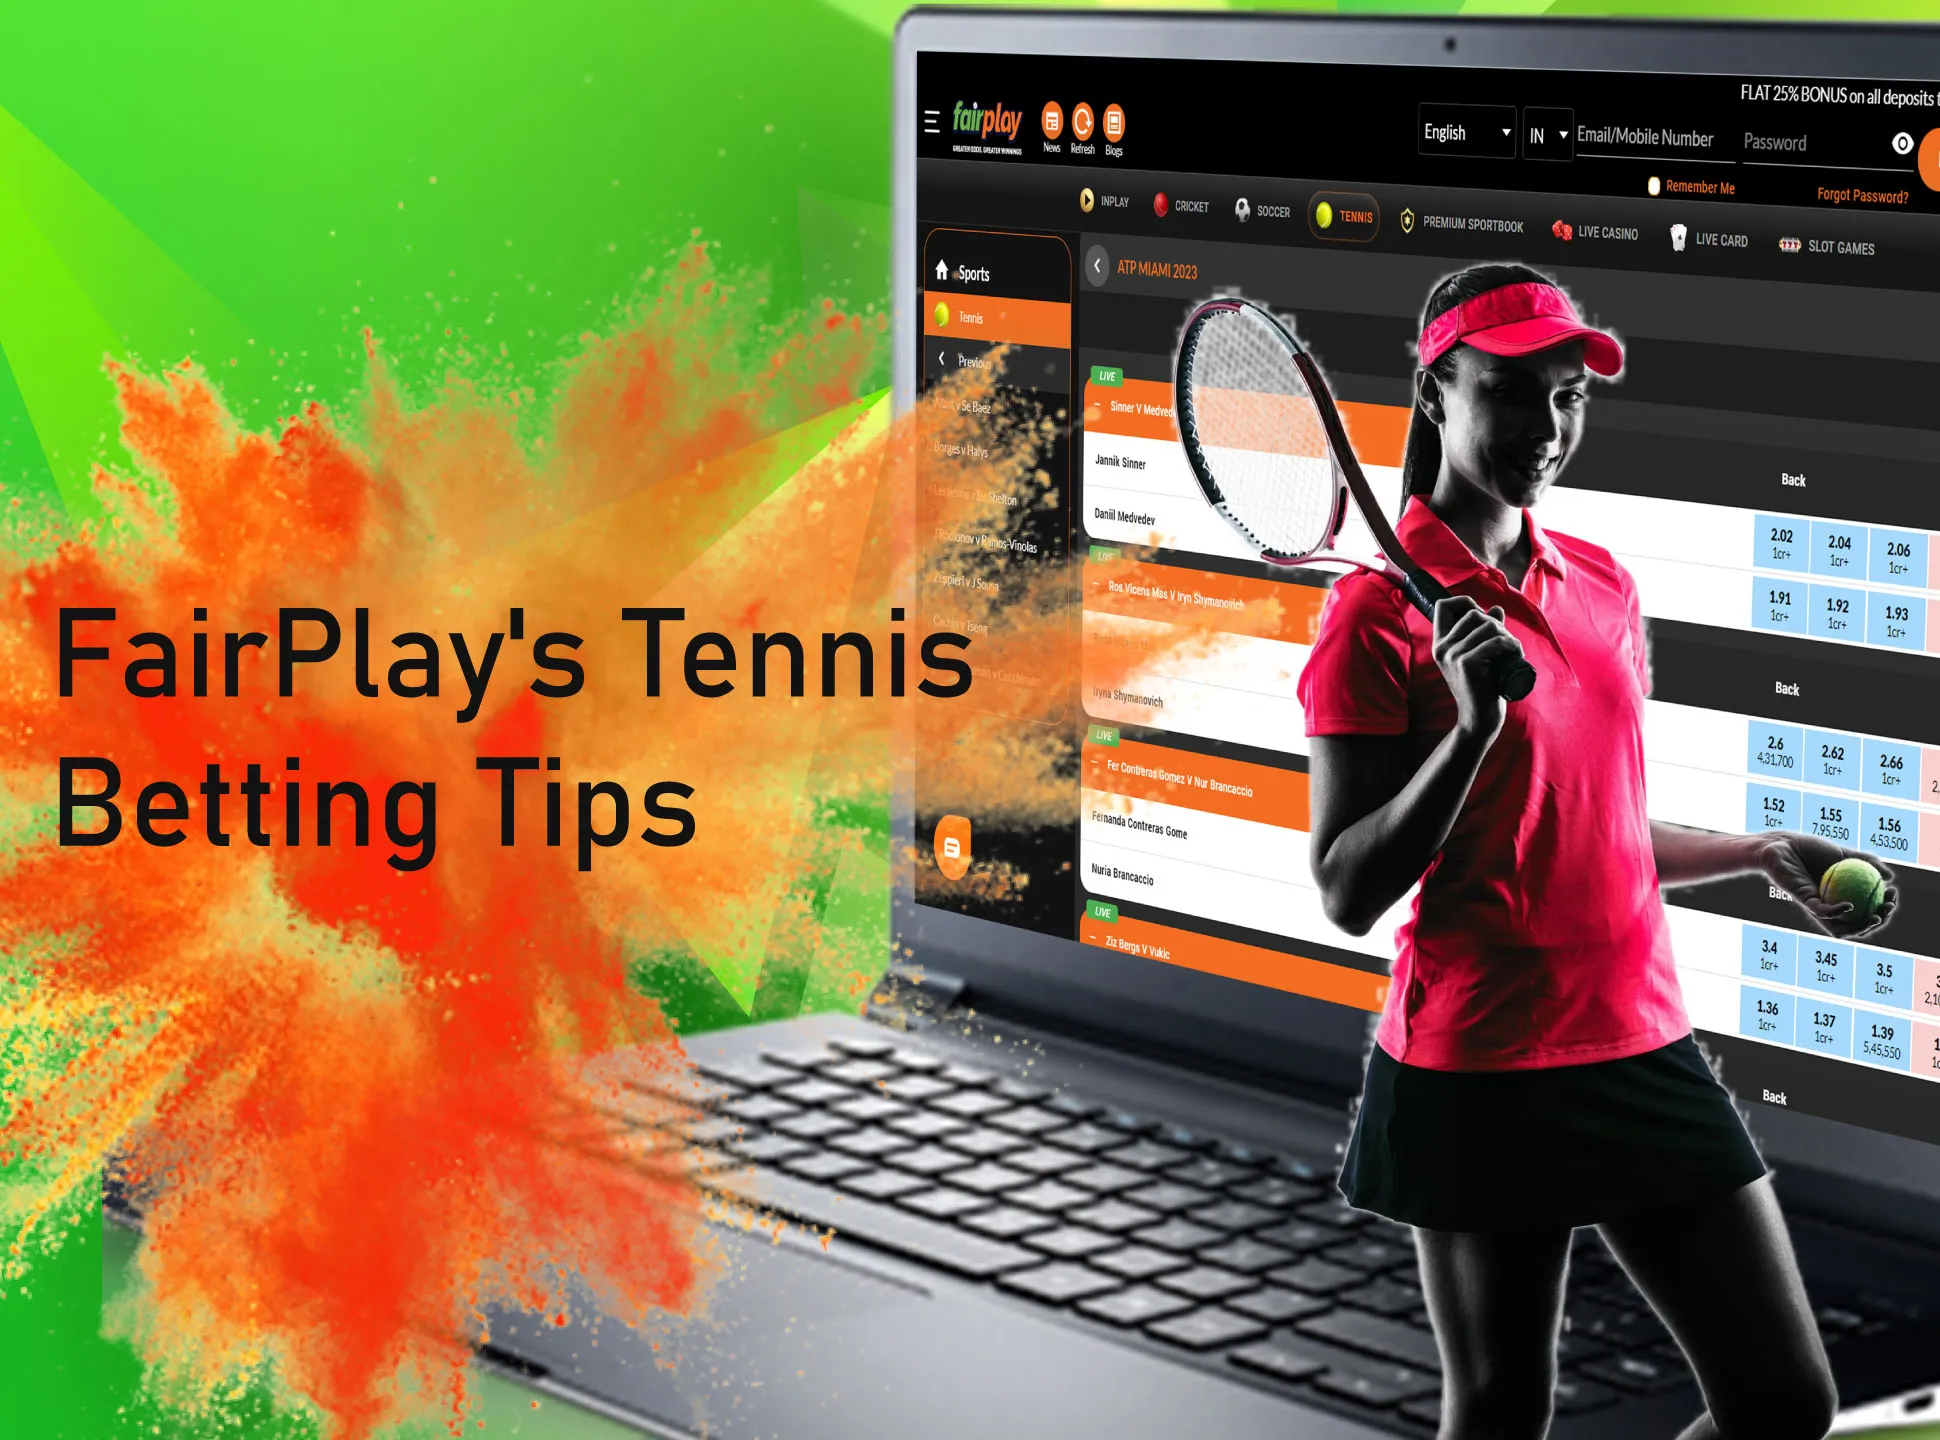 Use our tips to win more from the tennis betting on Fairplay.